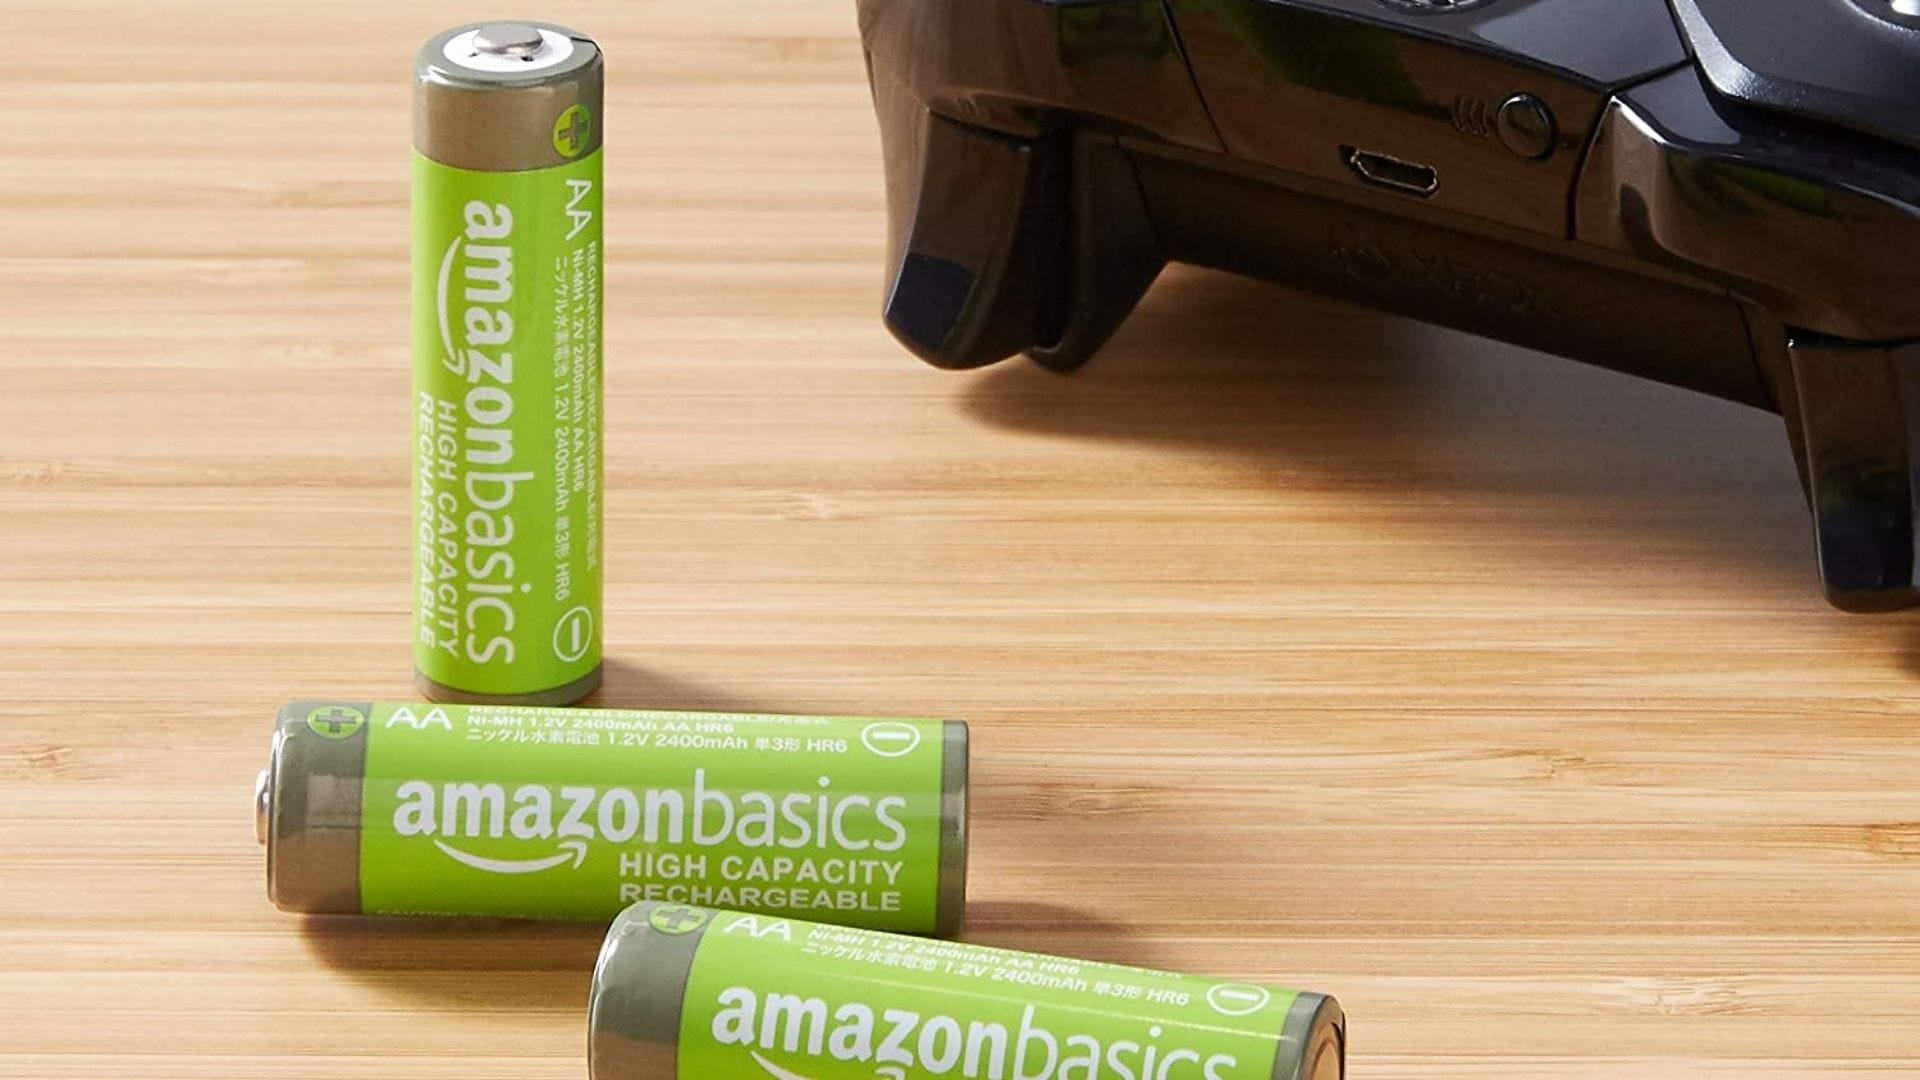 How Do Rechargeable Batteries Actually Work?